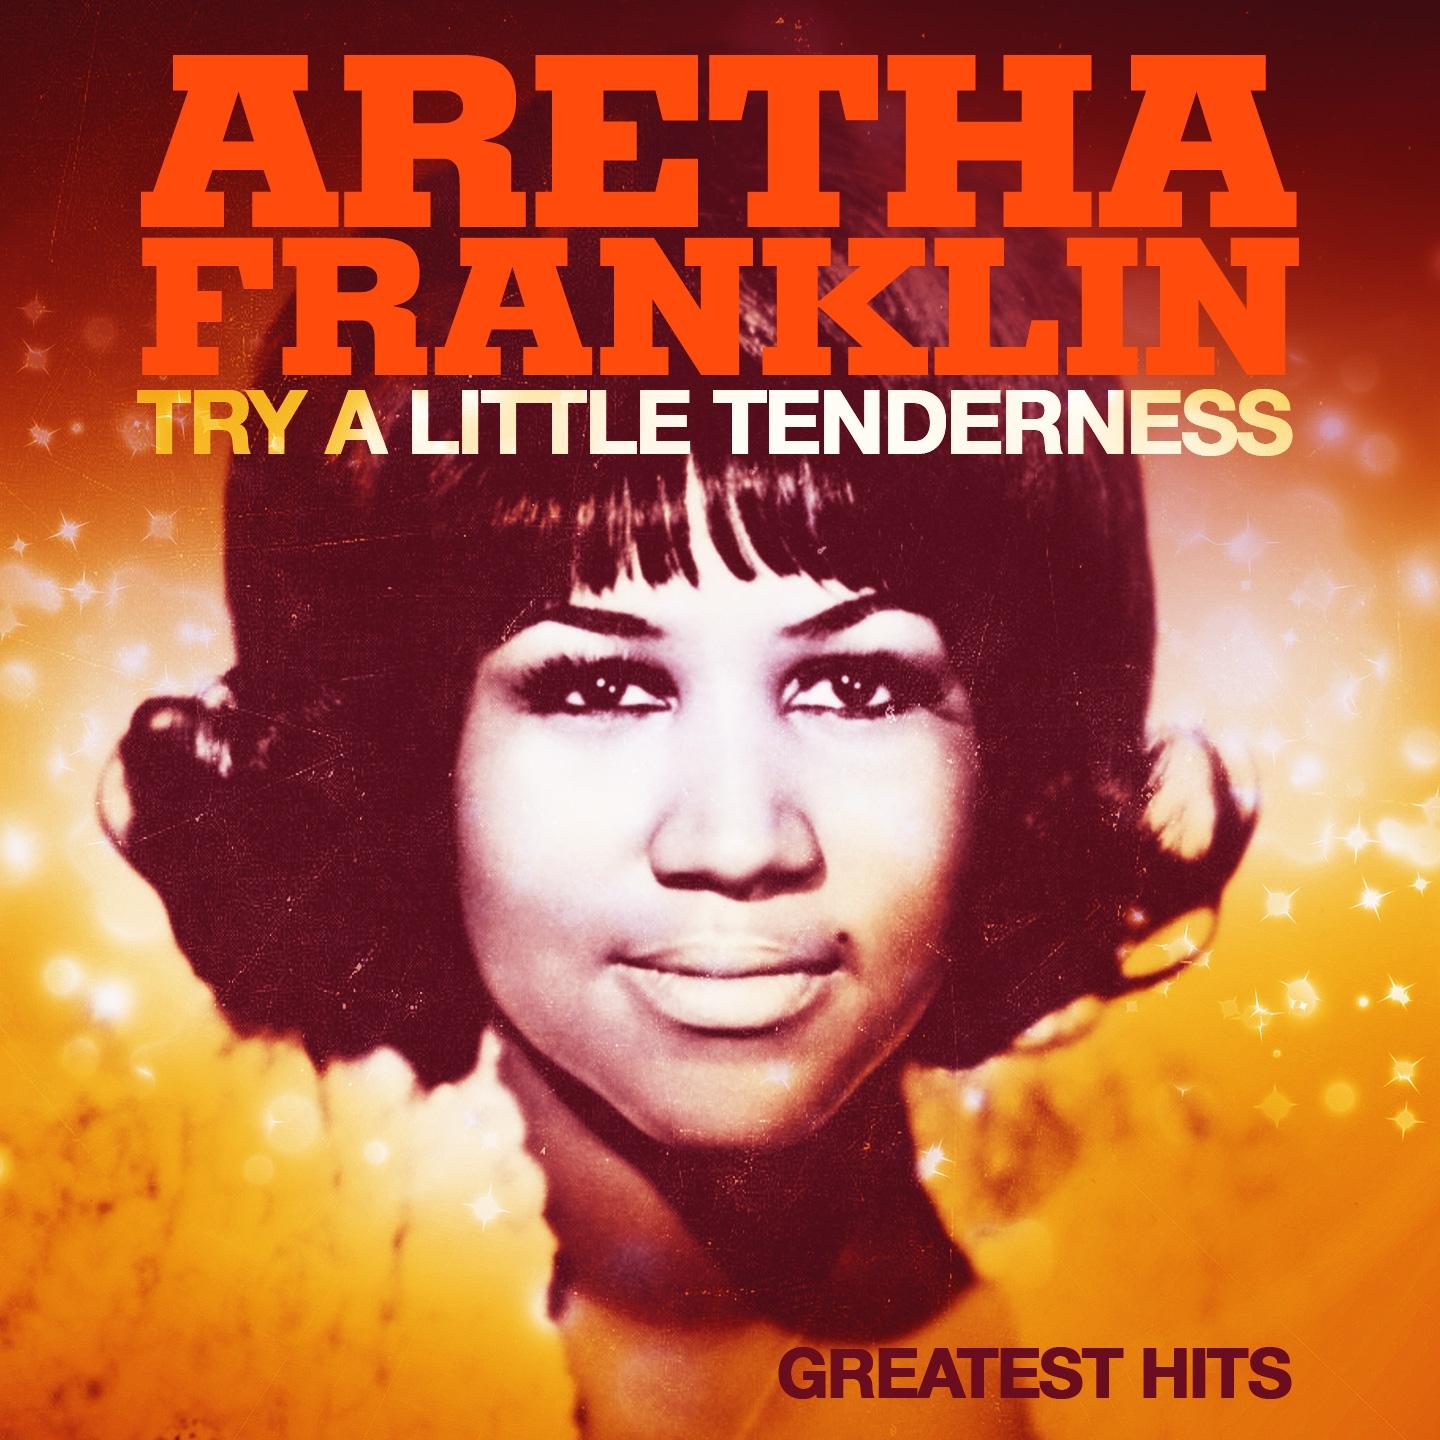 Try a Little Tenderness and Greatest Hits (Remastered)